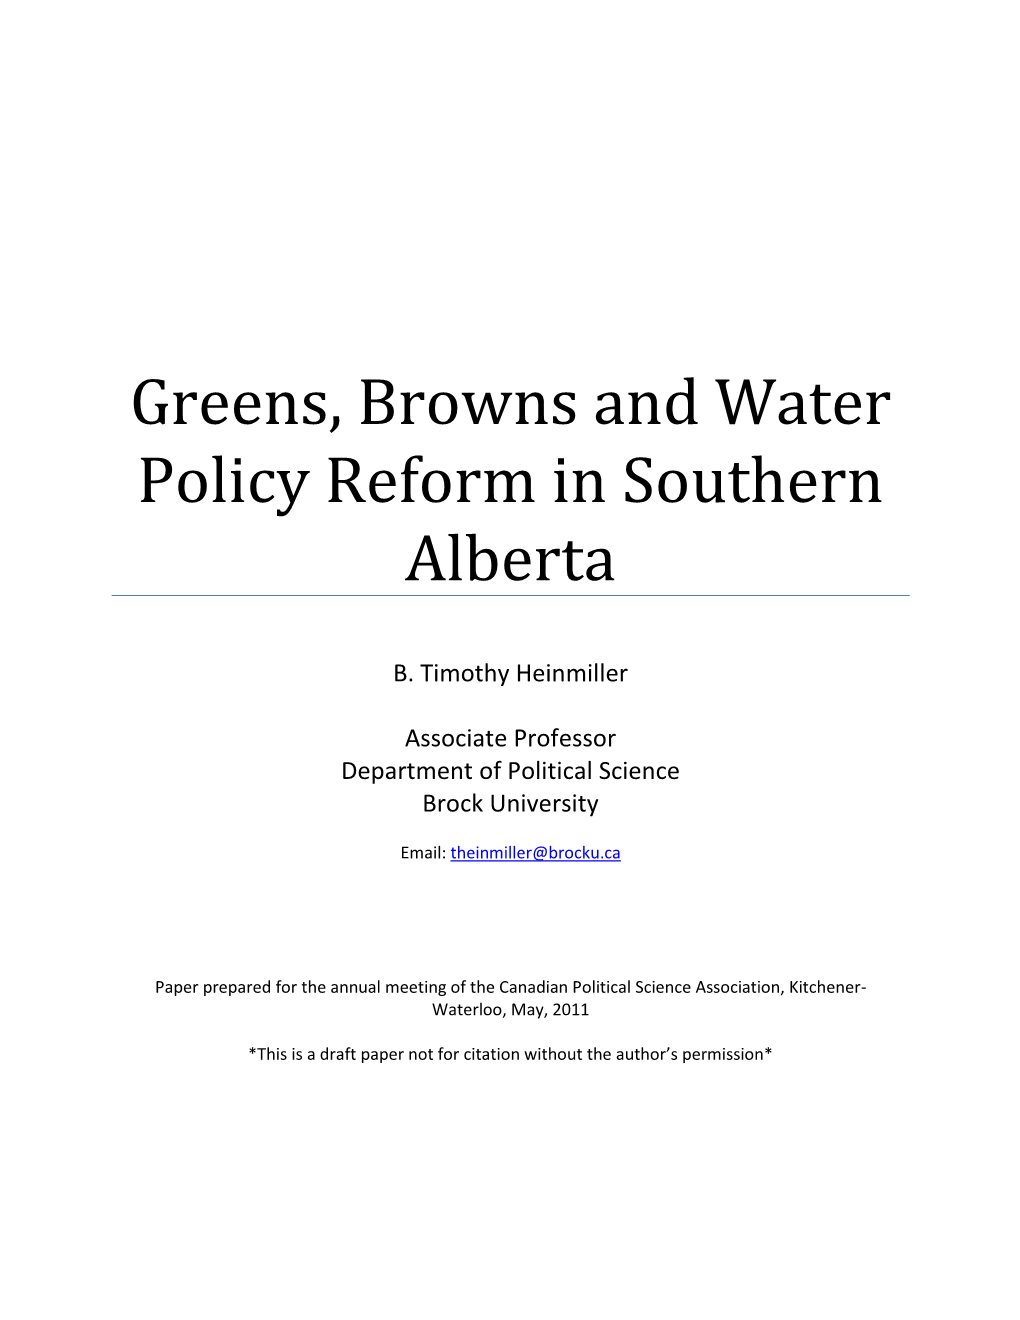 Greens, Browns and Water Policy Reform in Southern Alberta